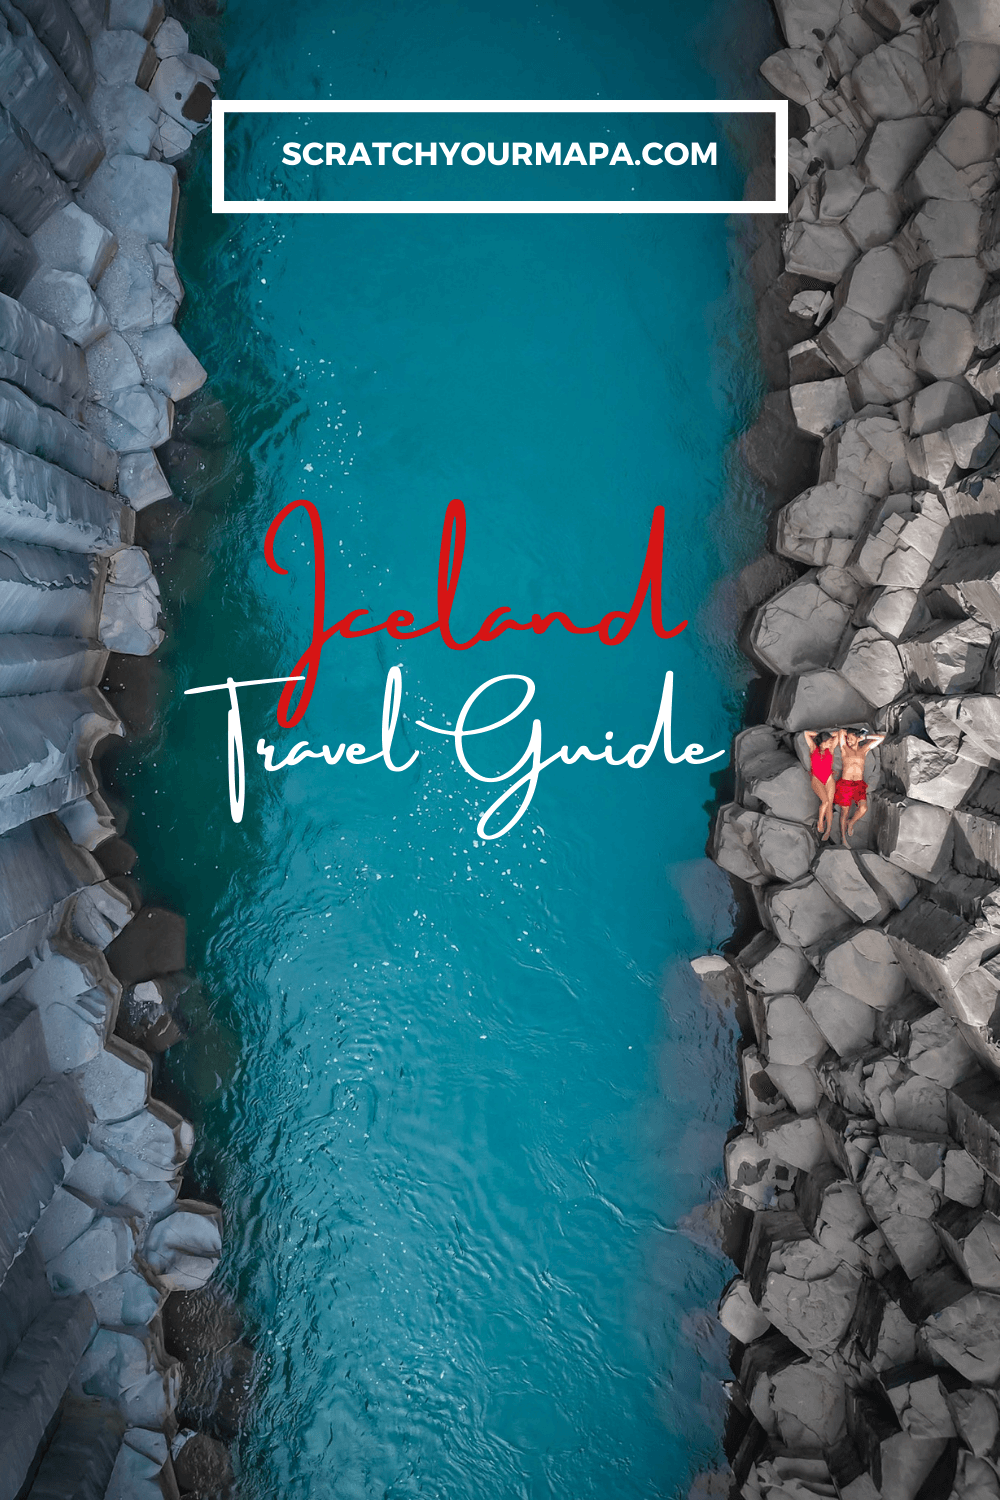 Iceland travel guide pin